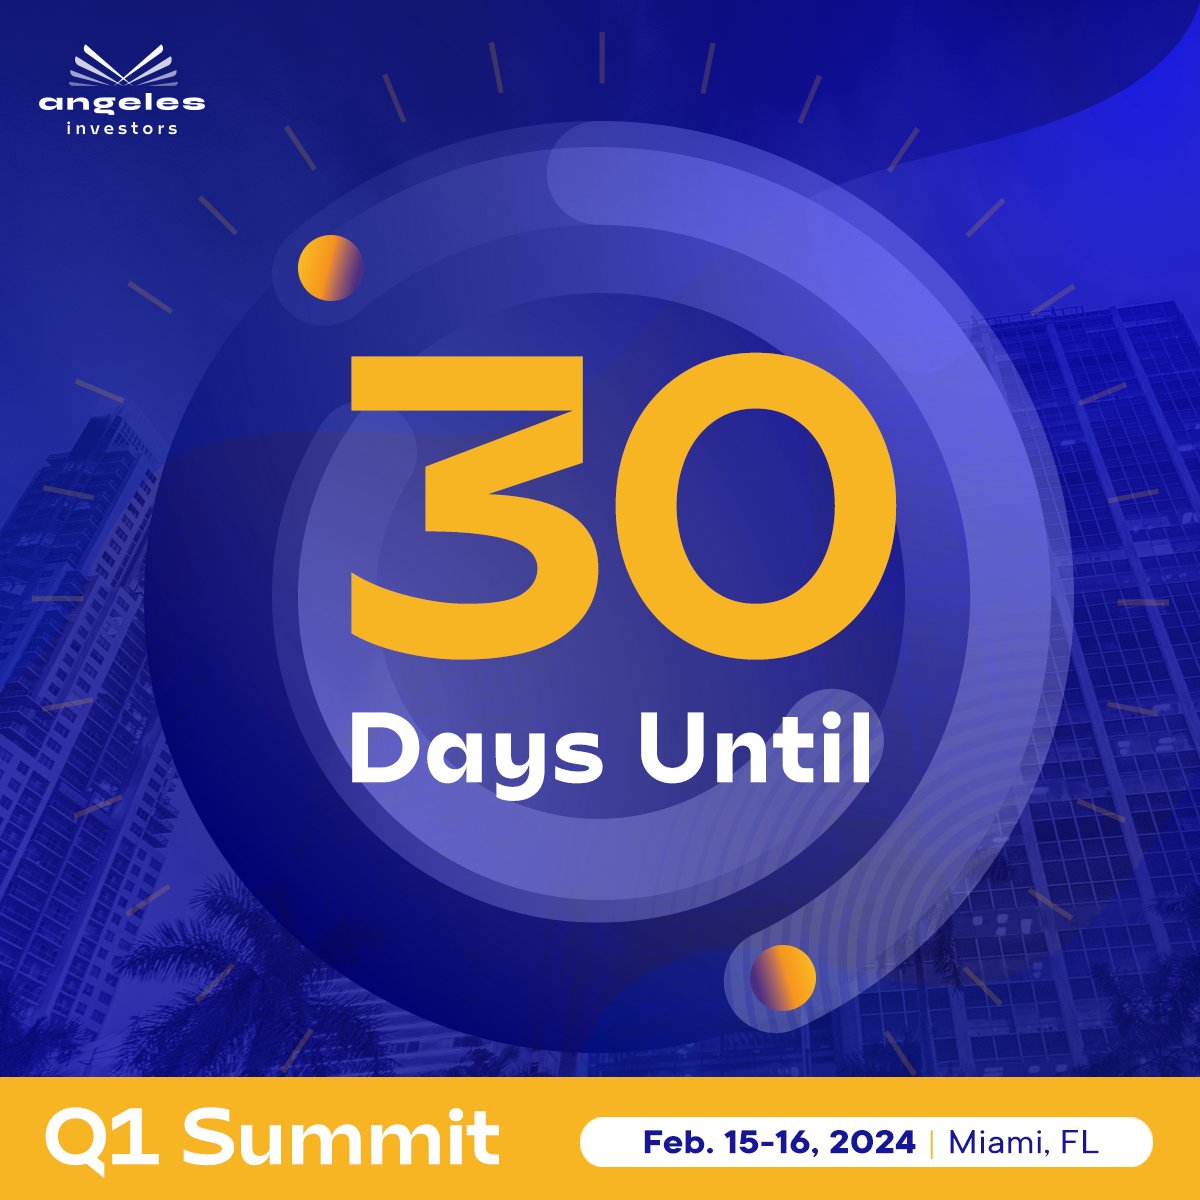 We are just 30 days away from our #Q1Summit! Experience investing in the top Hispanic & Latino startups and connecting with like-minded individuals through amazing networking opportunities this Feb. 15-16 in #Miami ➡ eventbrite.com/e/2024-1st-qua… #angelesmembers